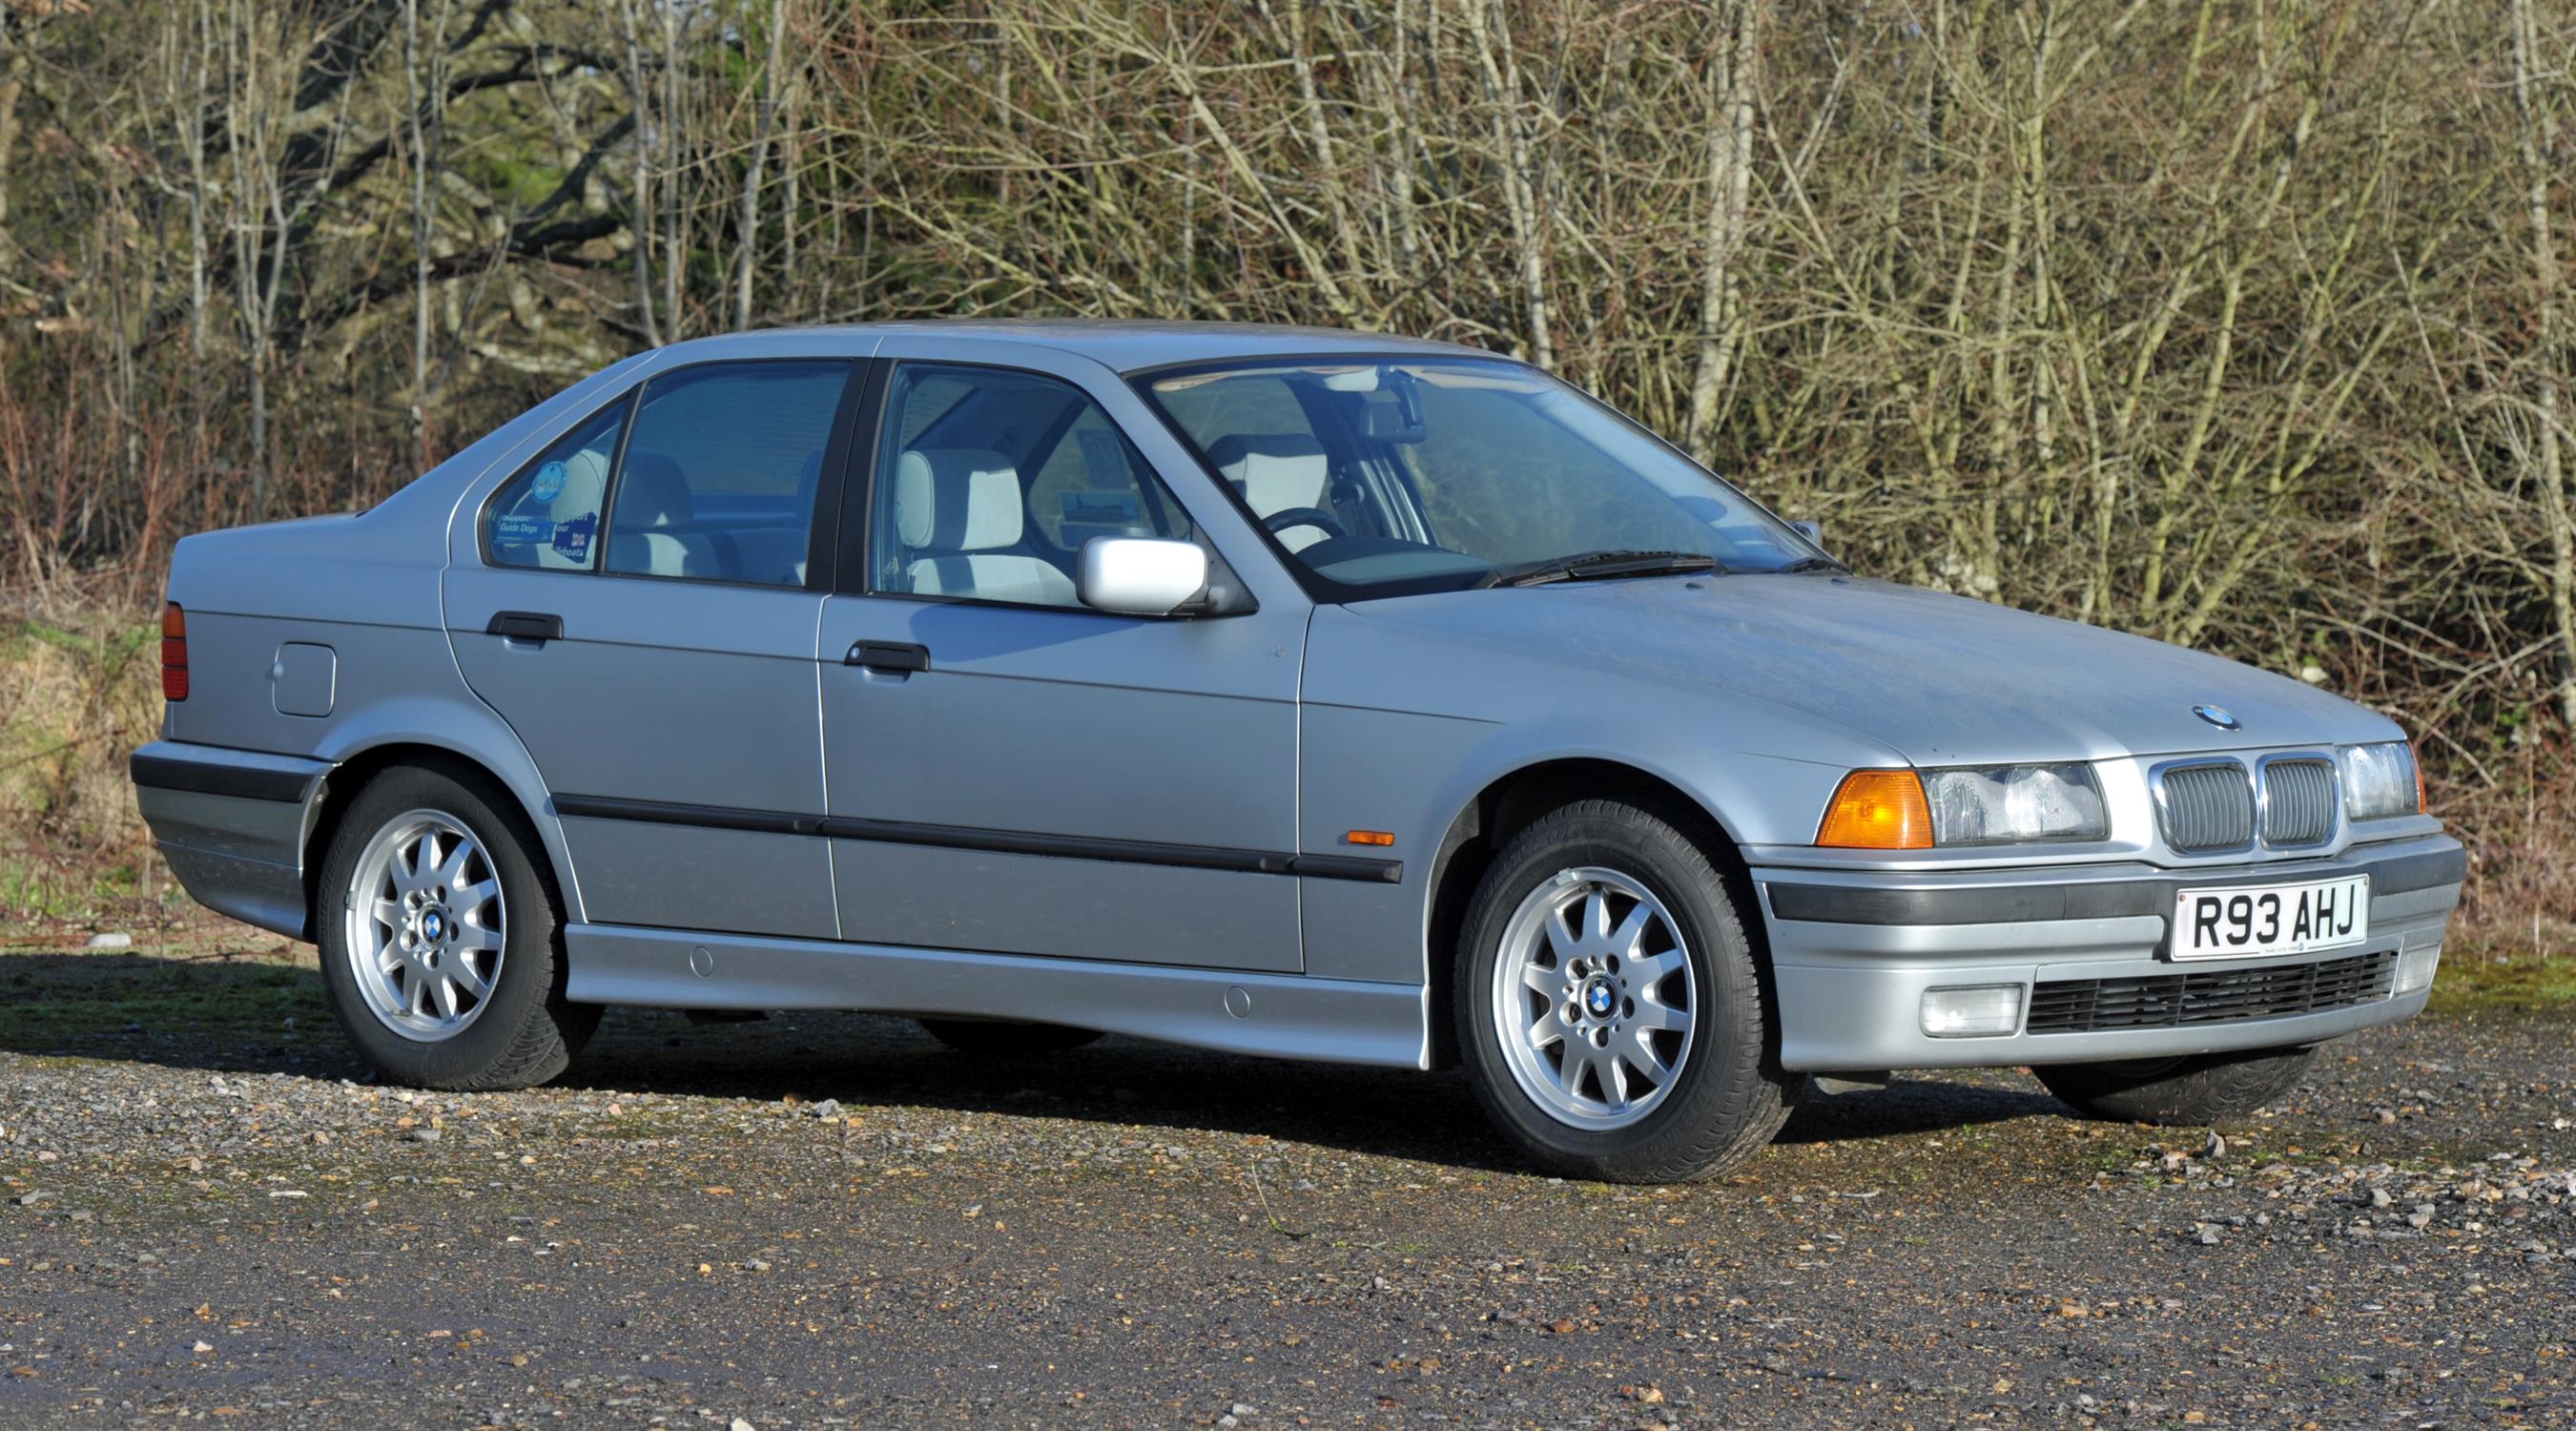 1997 BMW 323i SE Petrol Saloon Manual. Registration number: R93 AHJ. Only one owner with a genuine